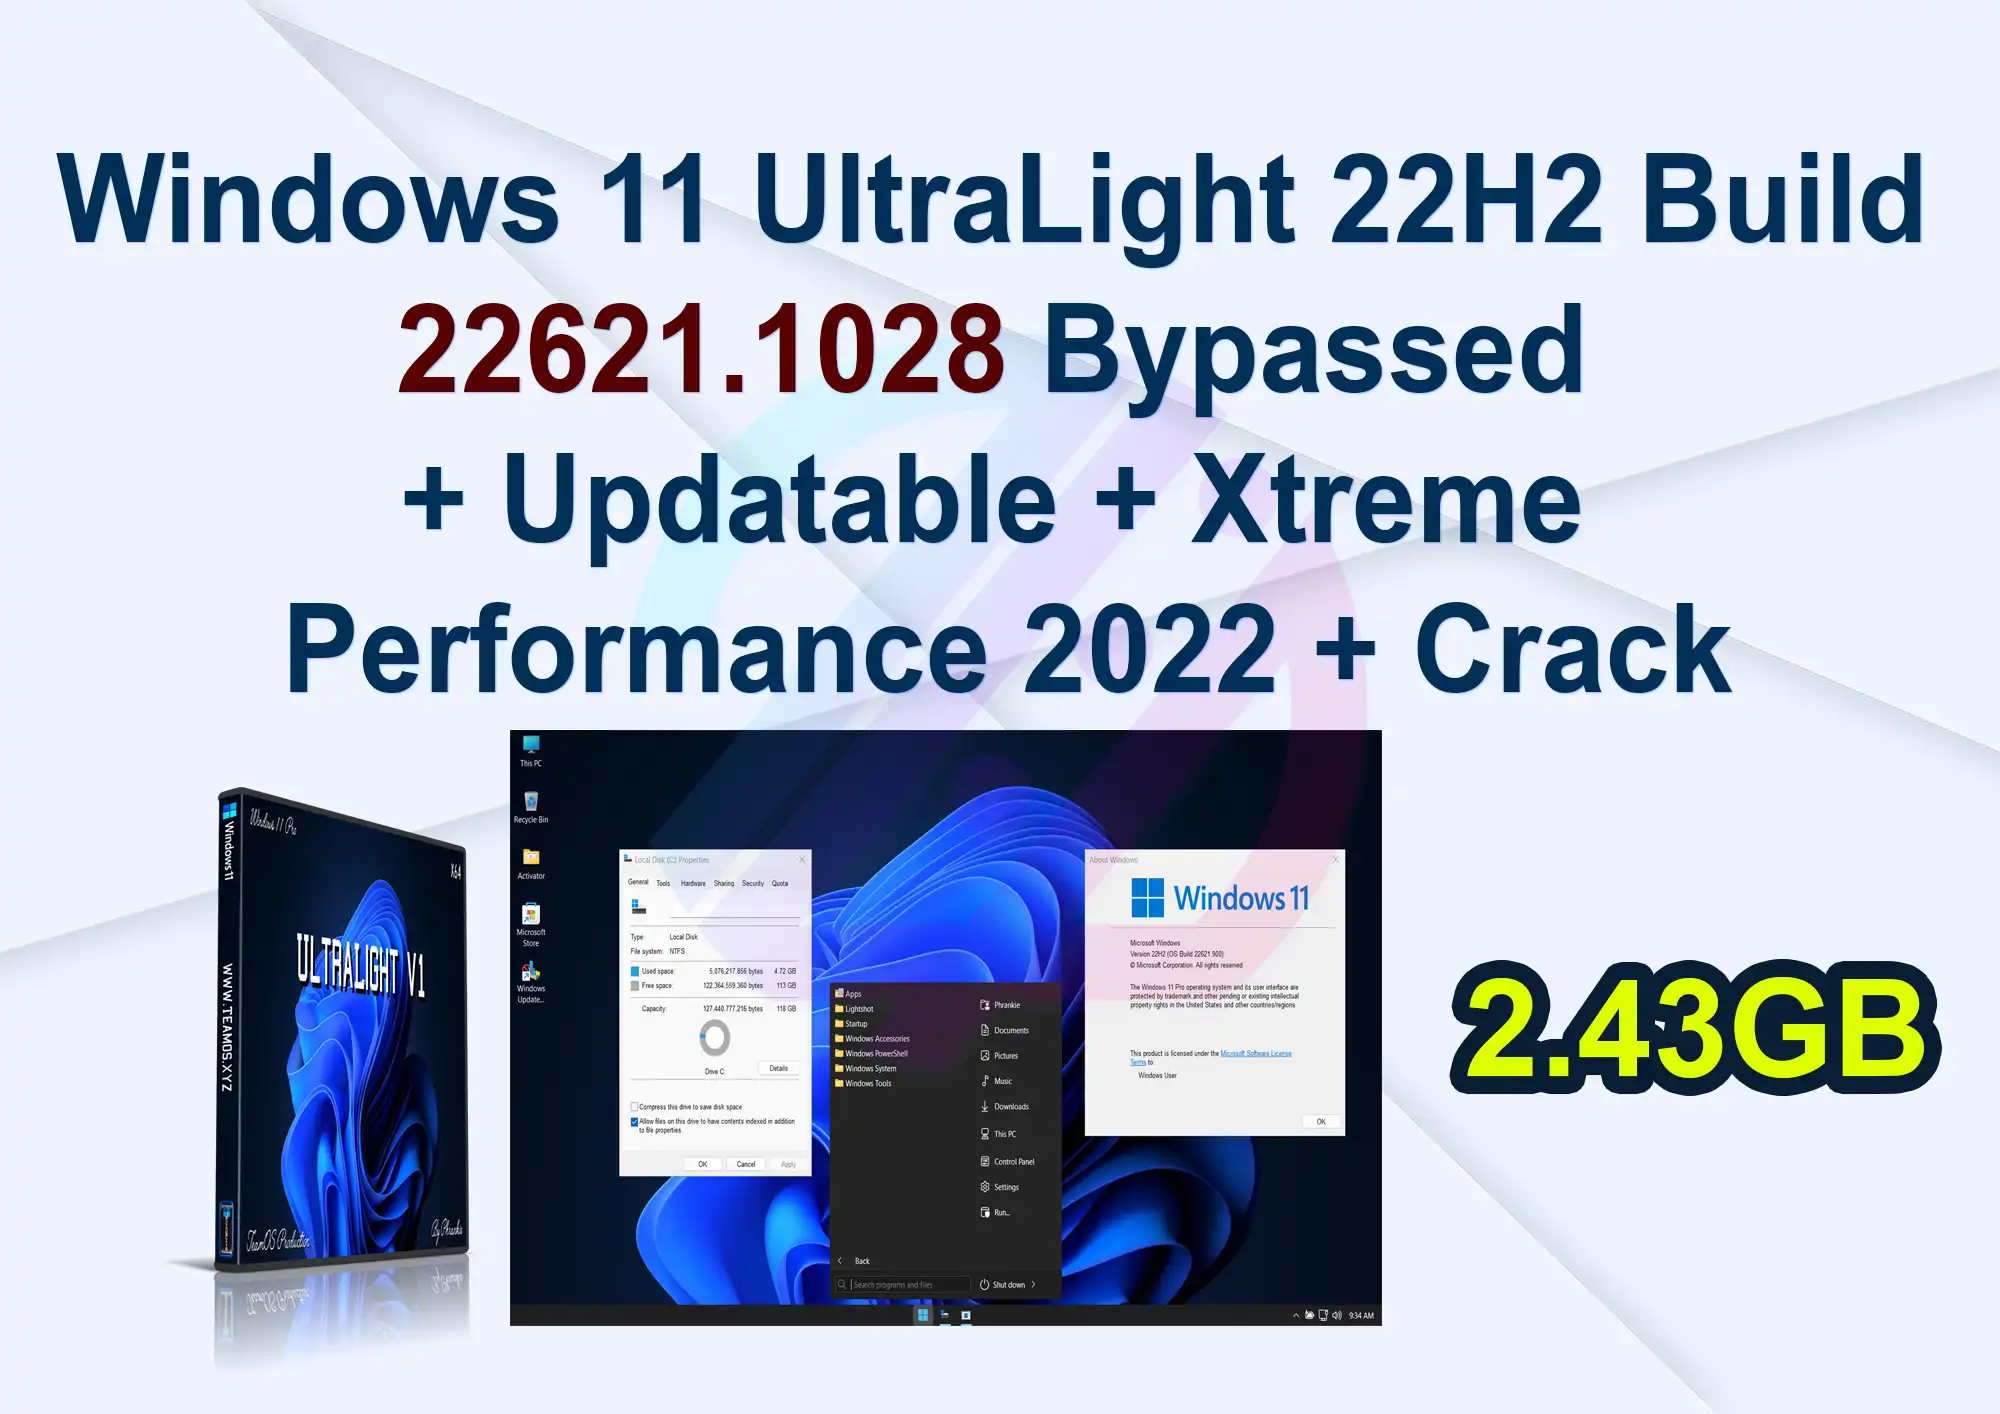 Windows 11 UltraLight 22H2 Build 22621.1028 Bypassed + Updatable + Xtreme Performance 2022 + Crack